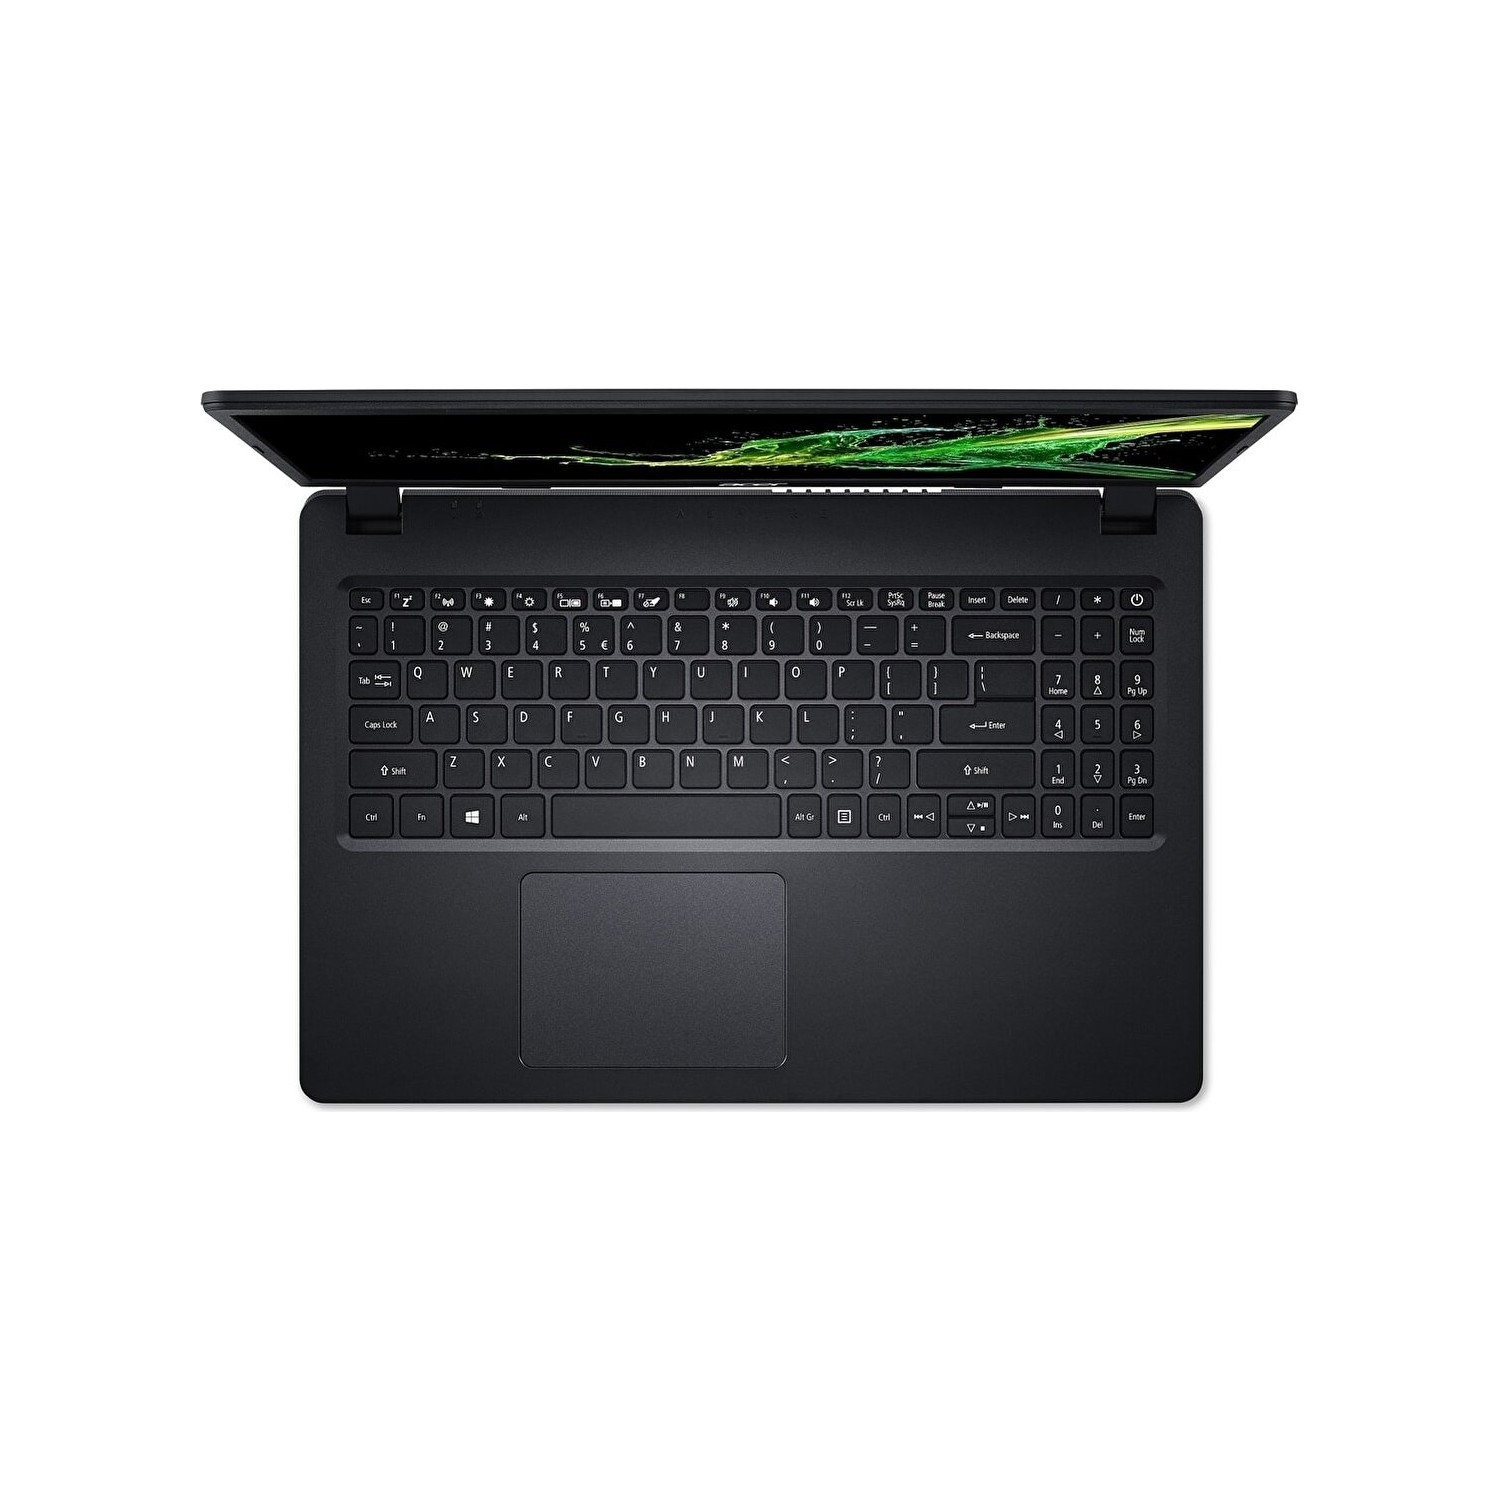 Acer Aspire a315-34. Acer a315 55kg 31e4 клавиатура. Acer Aspire a315-34 Black Intel n4020 (up to 2.8GHZ), 8gb, 1tb + 512gb. Aspire a315-34 характеристики. Aspire a315 55